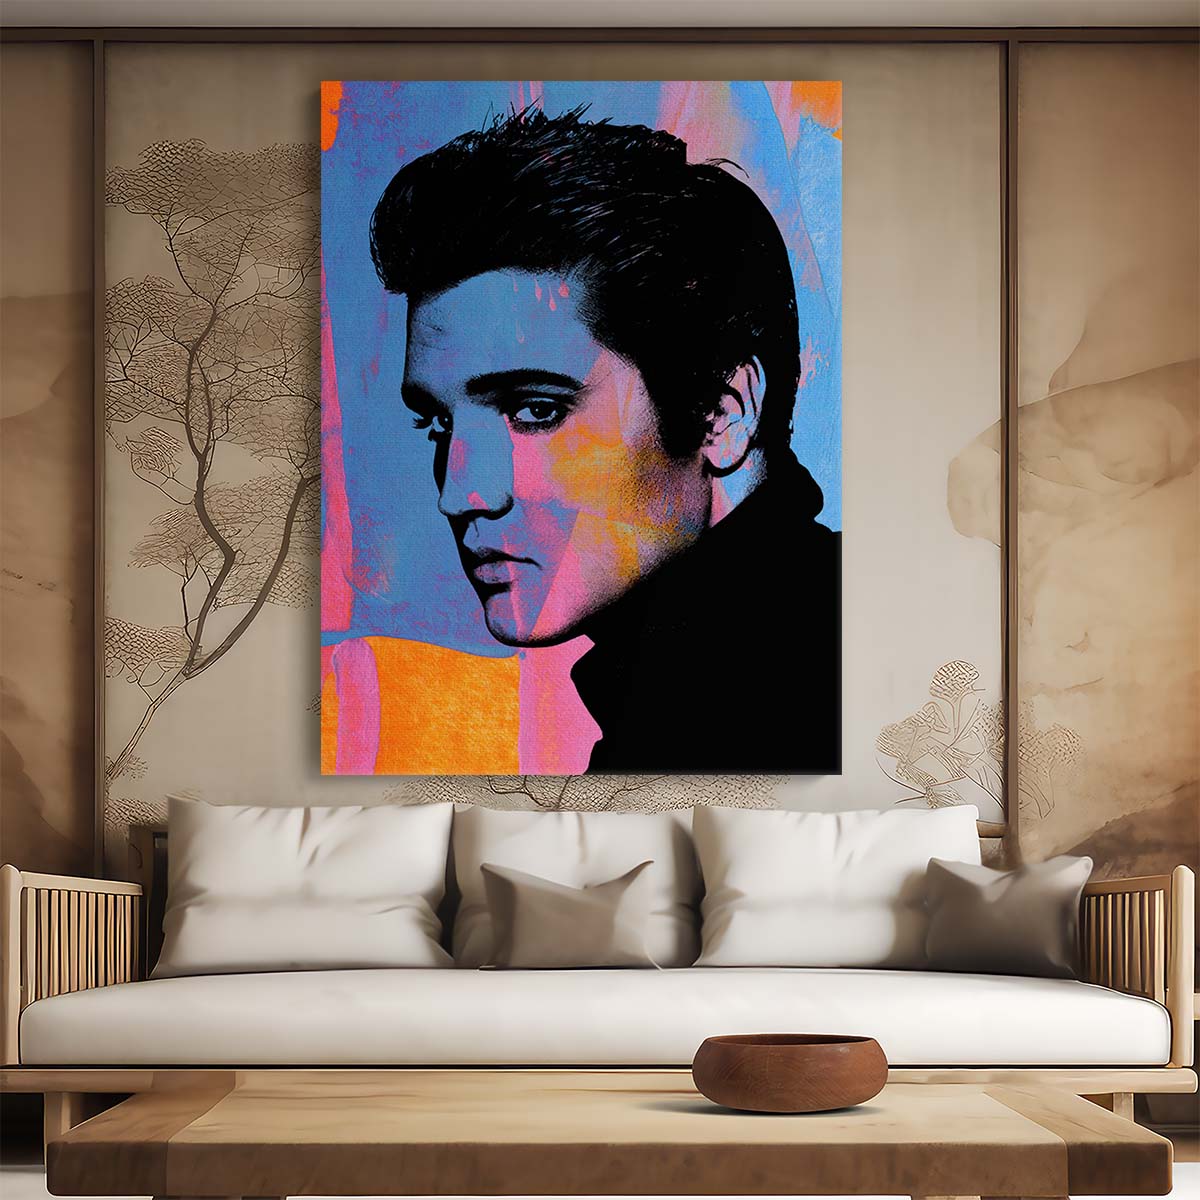 Elvis Presley Bright Colors Wall Art by Luxuriance Designs. Made in USA.